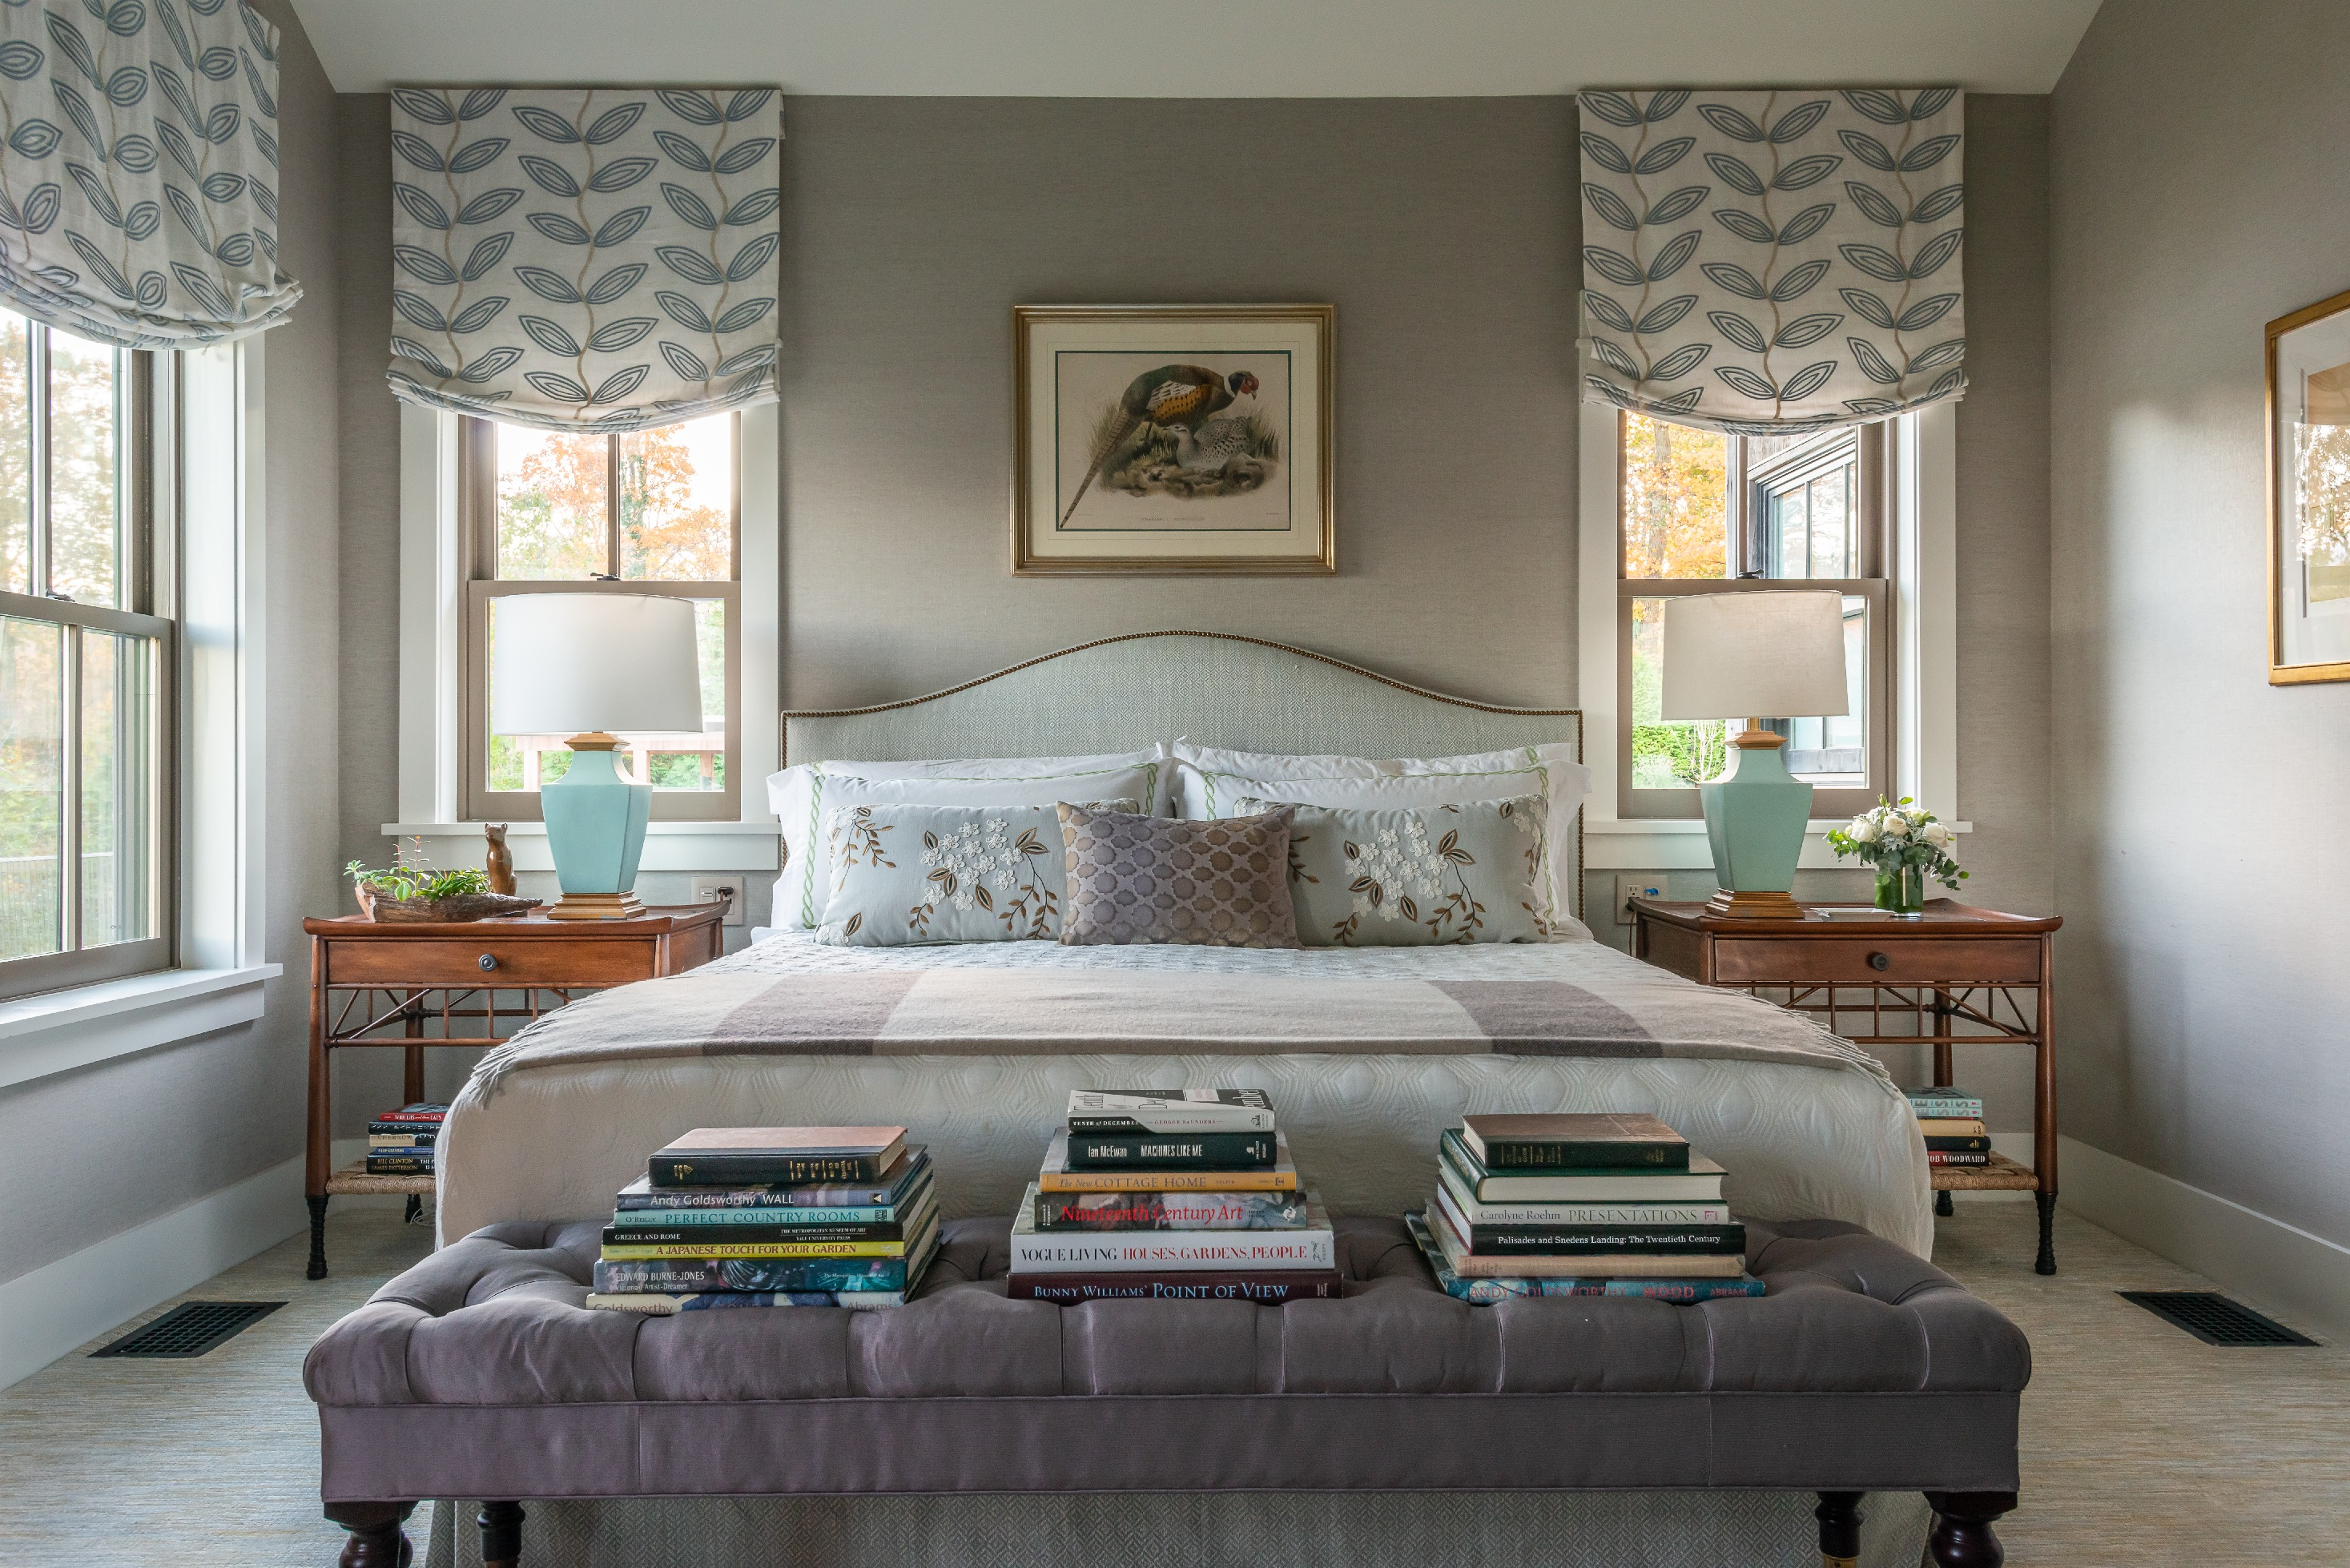  Modern Vacation Home Bedroom. Snedens Landing Residence by Alan Tanksley, Inc..